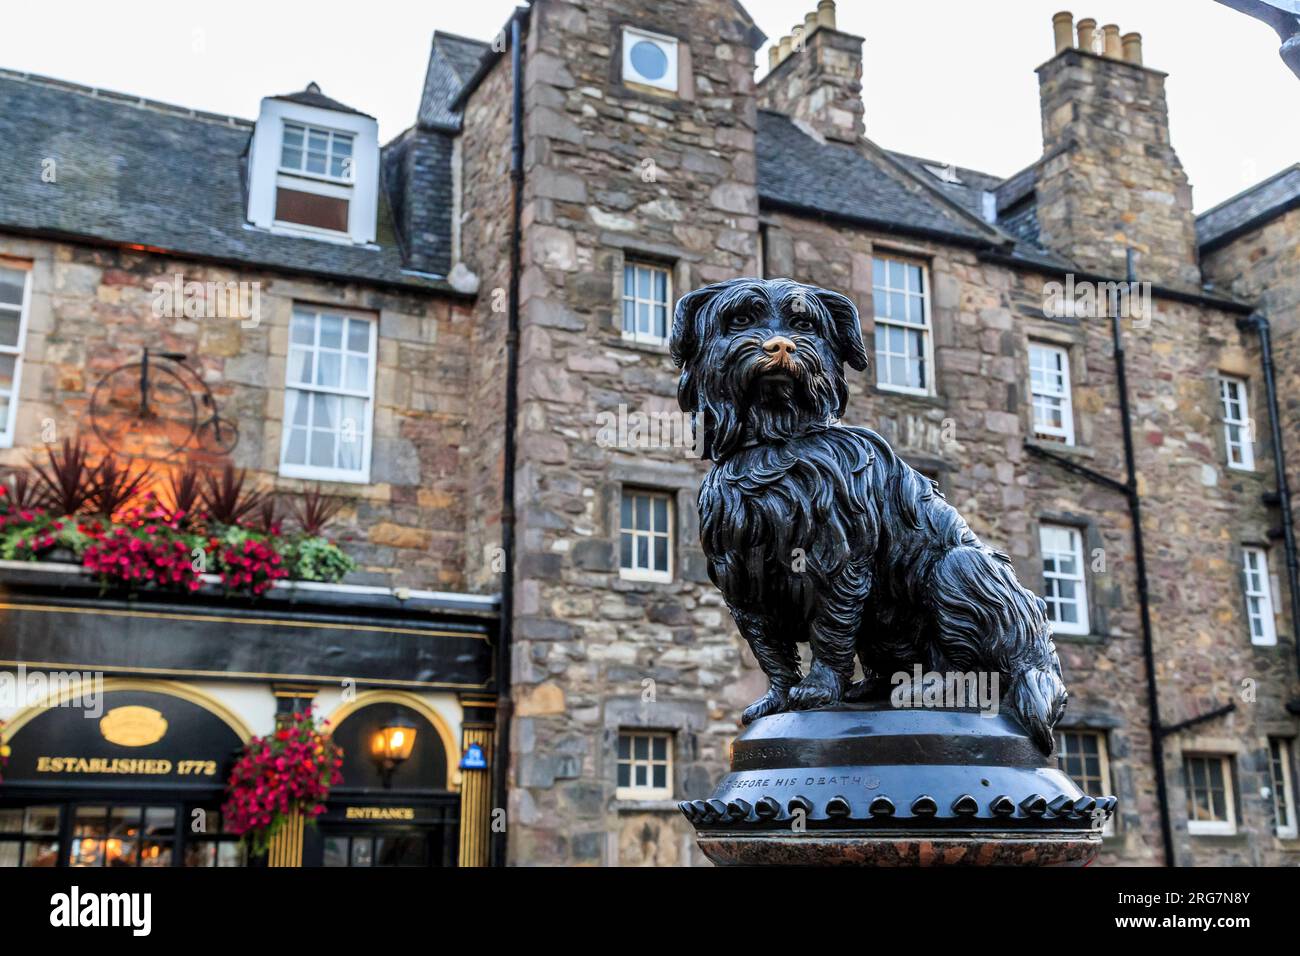 EDINBURGH, GREAT BRITAIN - SEPTEMBER 10, 2014: This is a monument to the Scottish sky terrier Bobby, who became famous for his devotion to the owner. Stock Photo